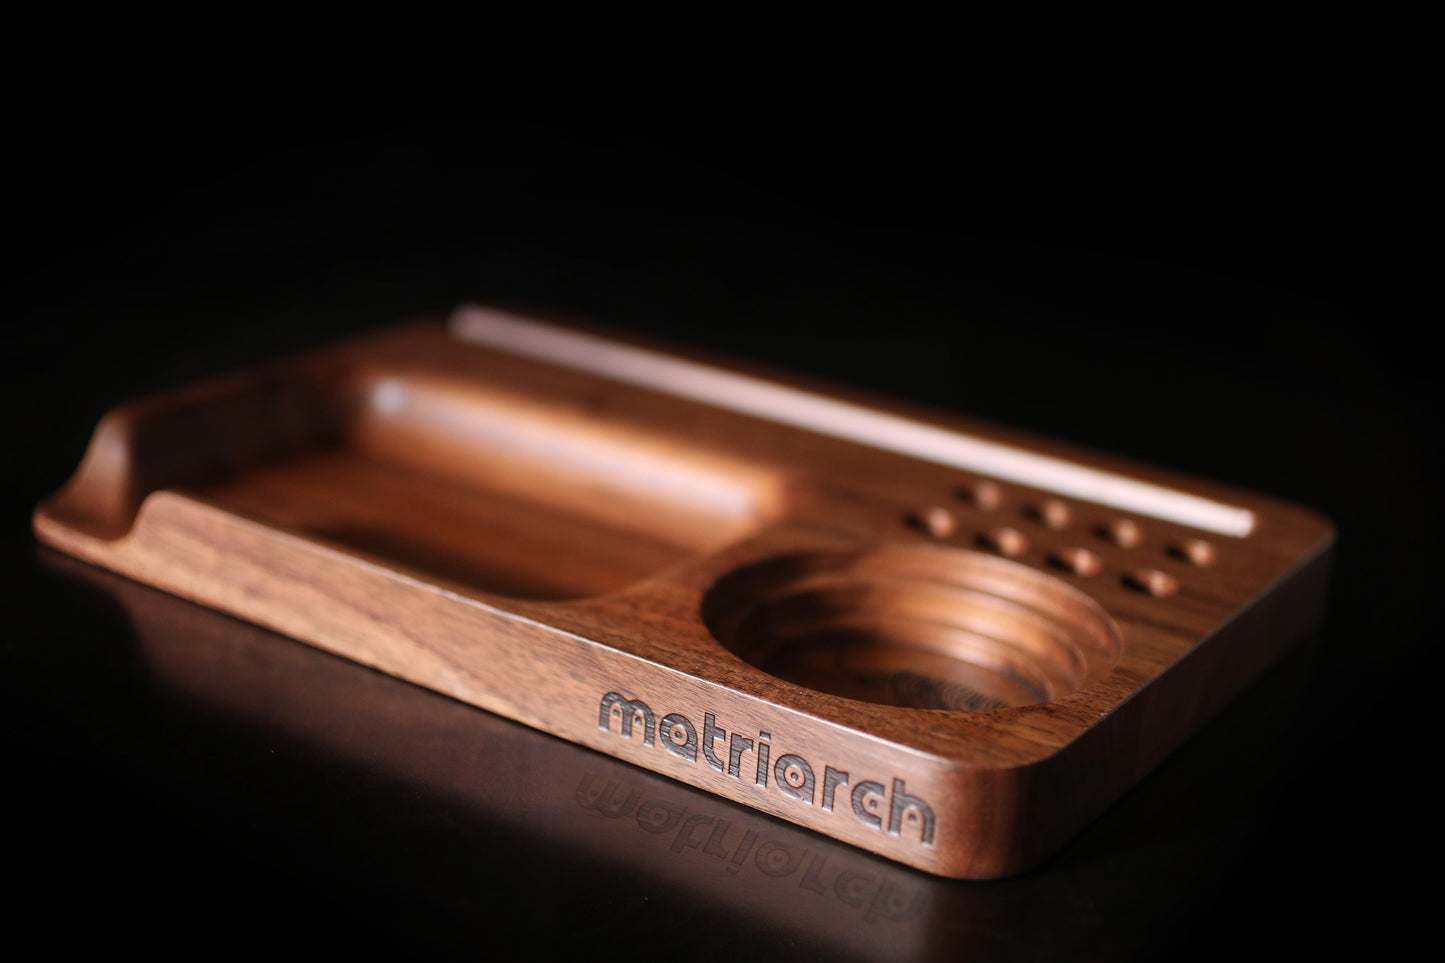 Wooden Blunt Tray - Photography and Web Design - Los Angeles, US based Shopify Experts Revo Designs